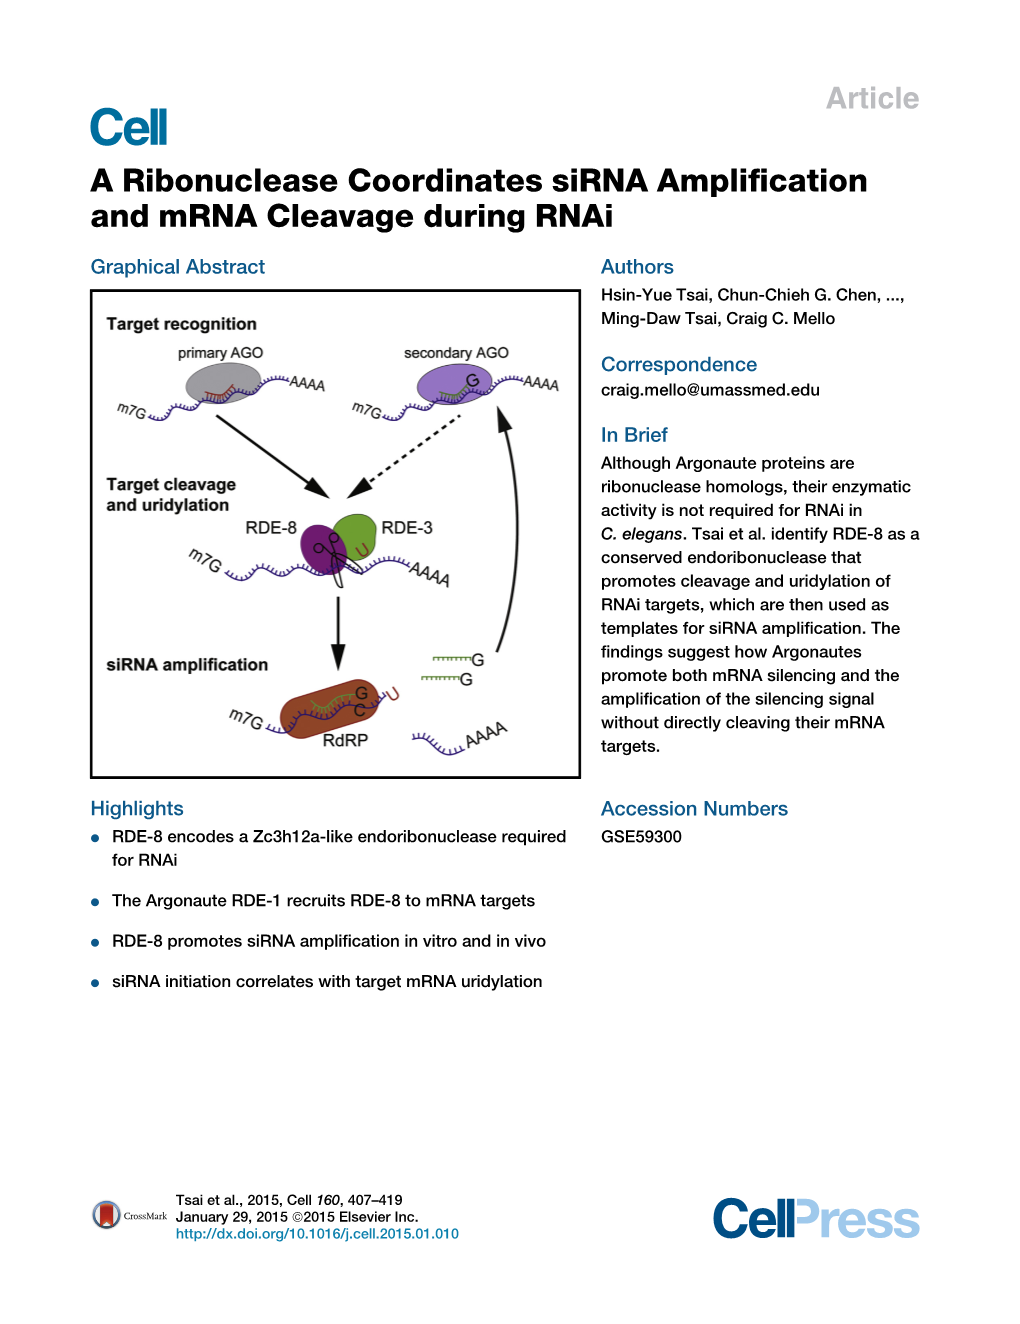 A Ribonuclease Coordinates Sirna Amplification and Mrna Cleavage